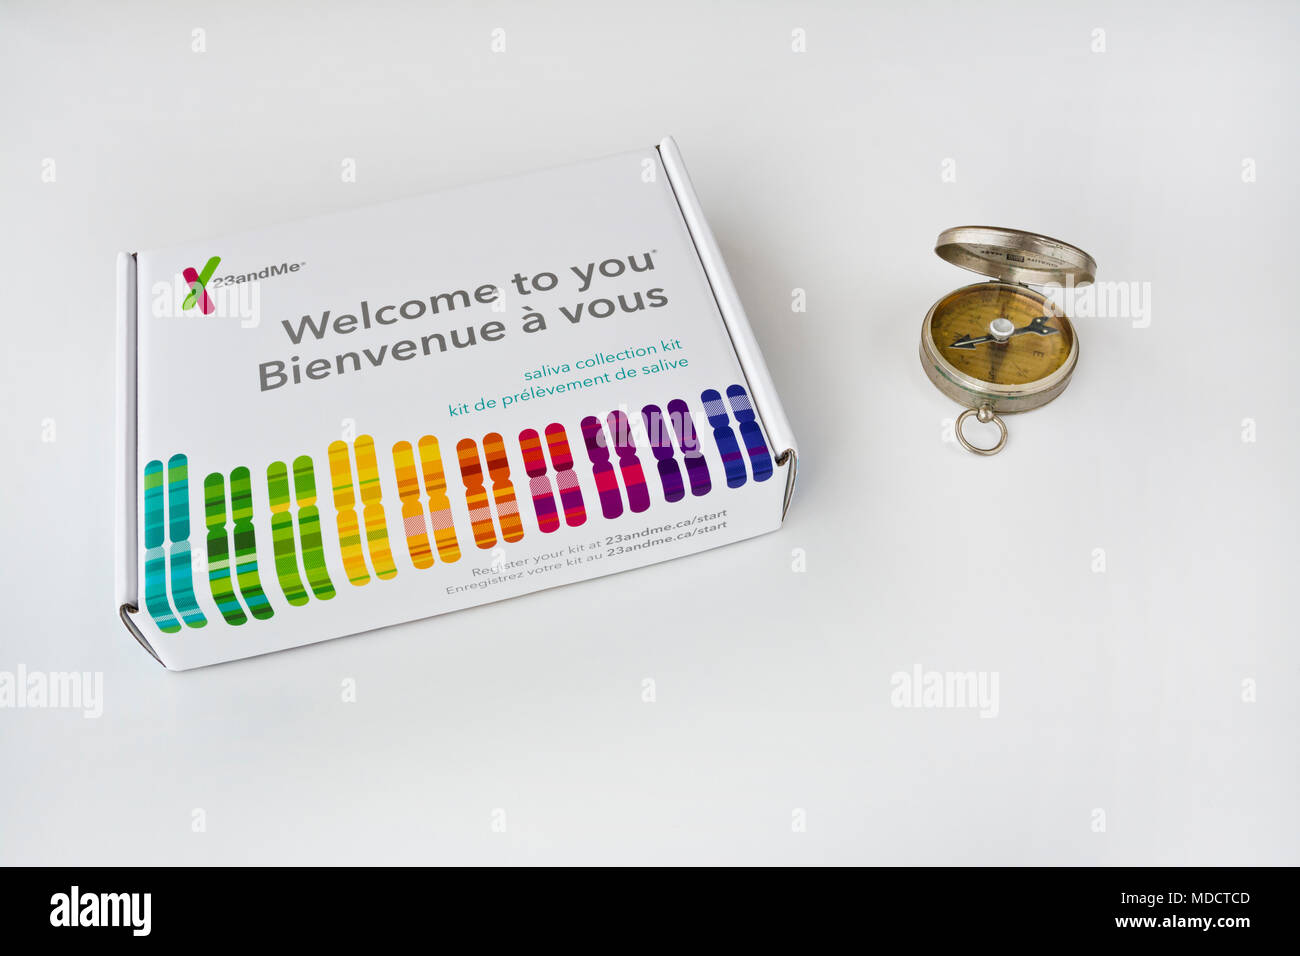 23andme home DNA test kit.  Box containing DNA testing kit by 23andme. Stock Photo